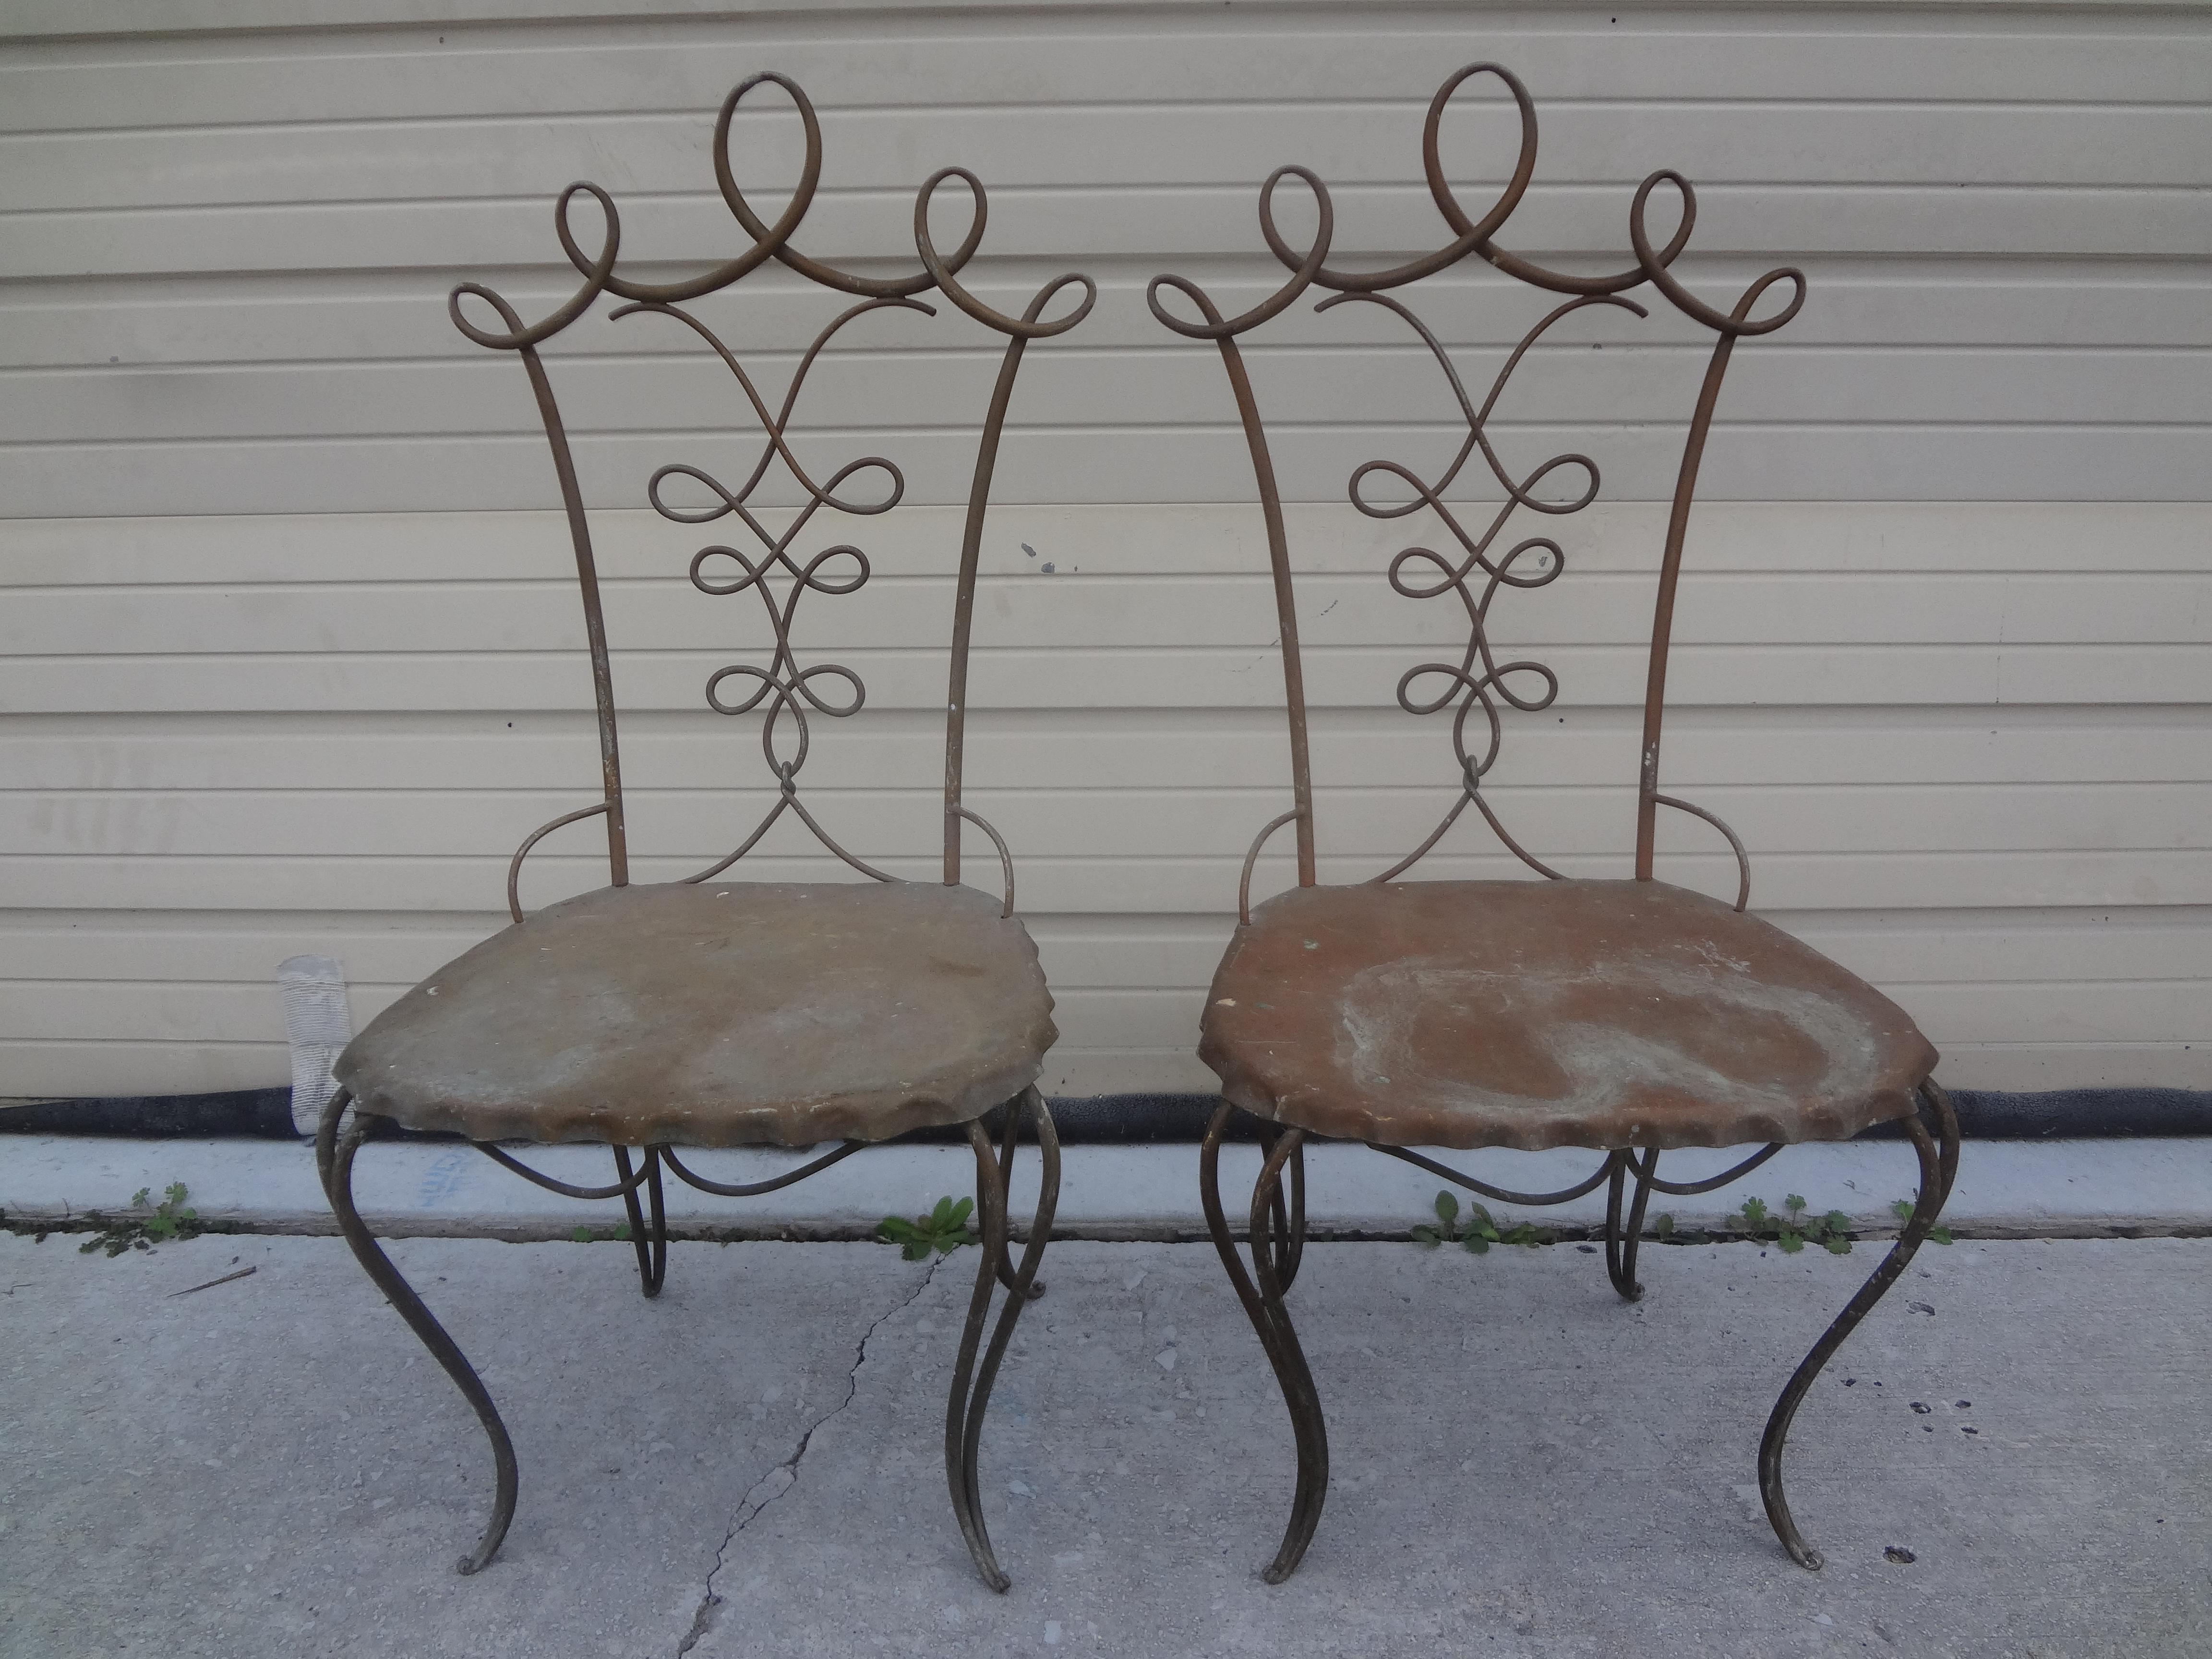 Pair of French Art Deco chairs attributed to Raymond Subes.
Stylish pair of French Art Deco hand forged wrought iron chairs attributed to Raymond Subes.
This chic pair of French side chairs could be polished or a cushion added if desired.
Gorgeous